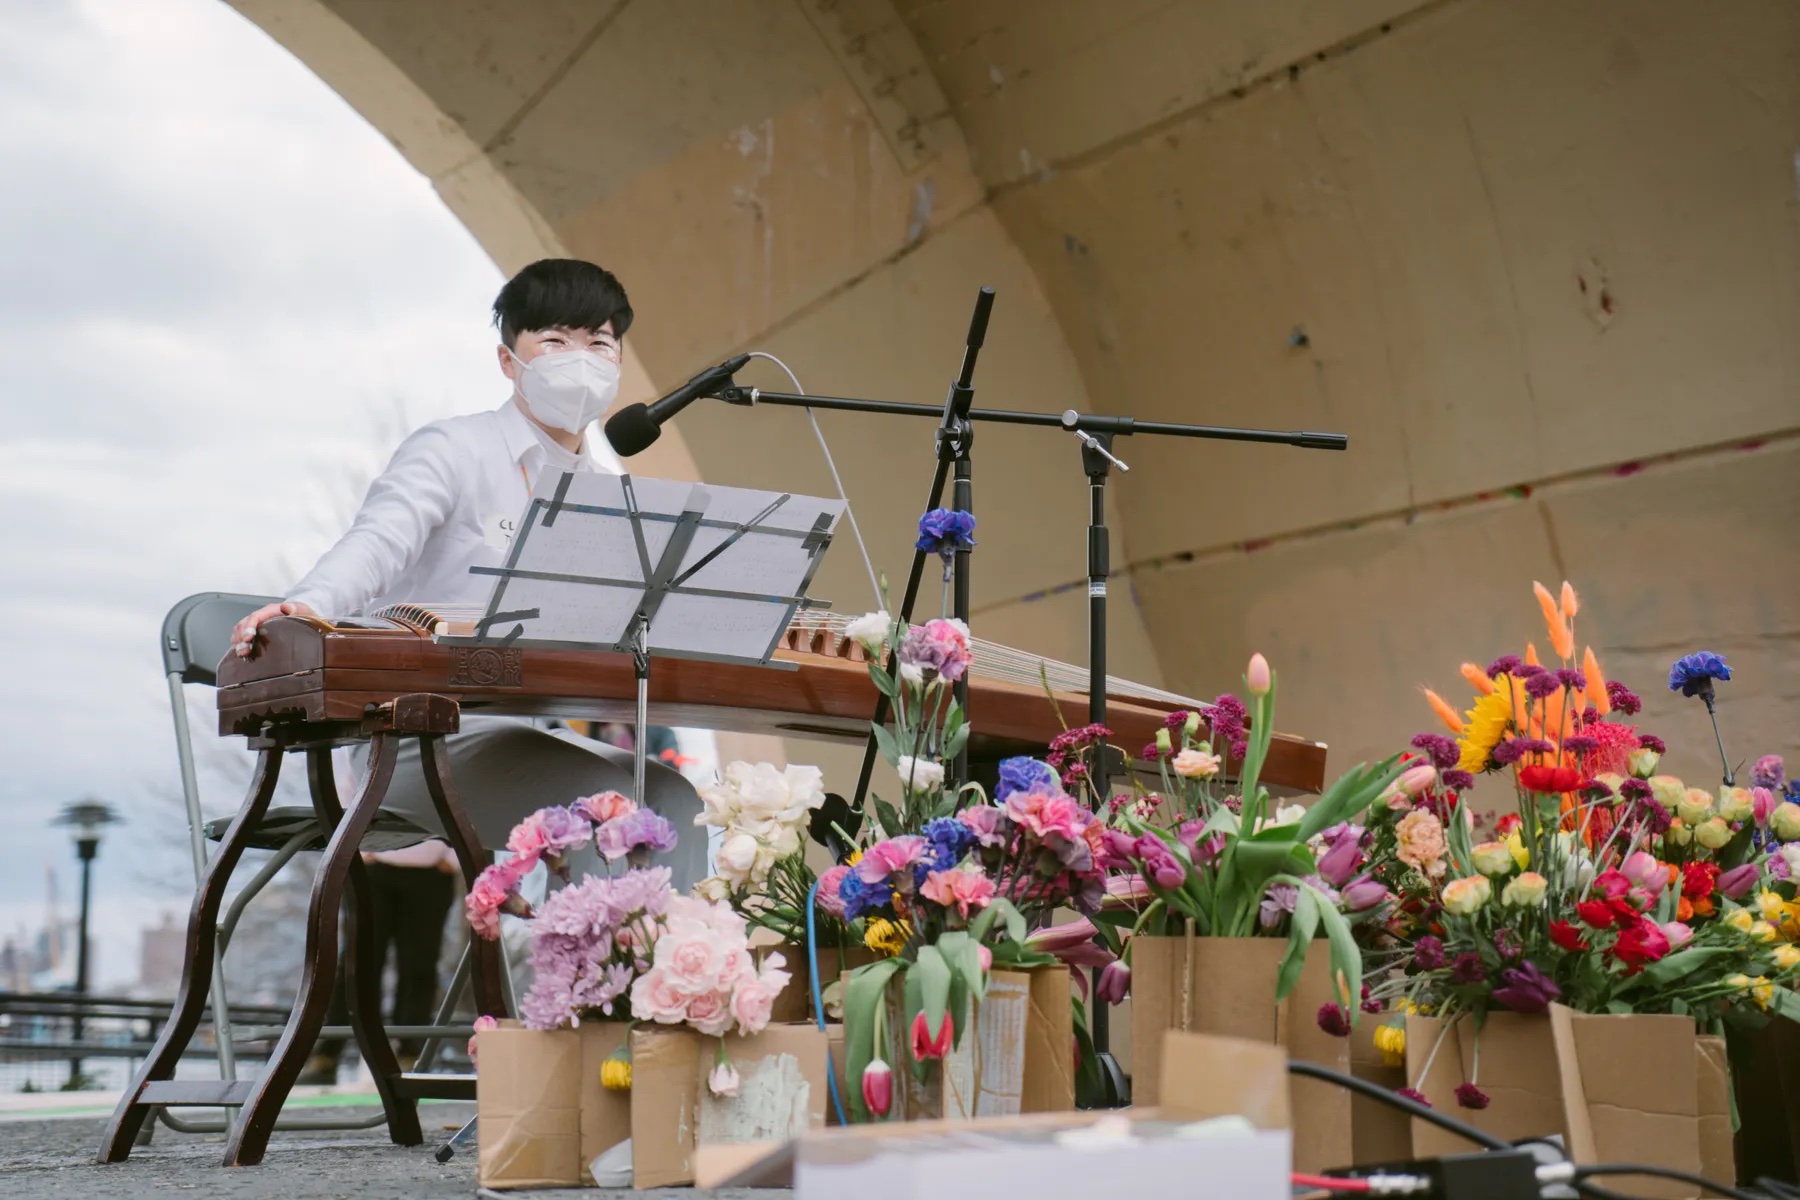 Clae Lu sitting behind their gu zheng in the amphitheater at East River Park. They are wearing a white mask, white shirt and light gray pants. In front of them are a variety of colorful flowers in brown bags